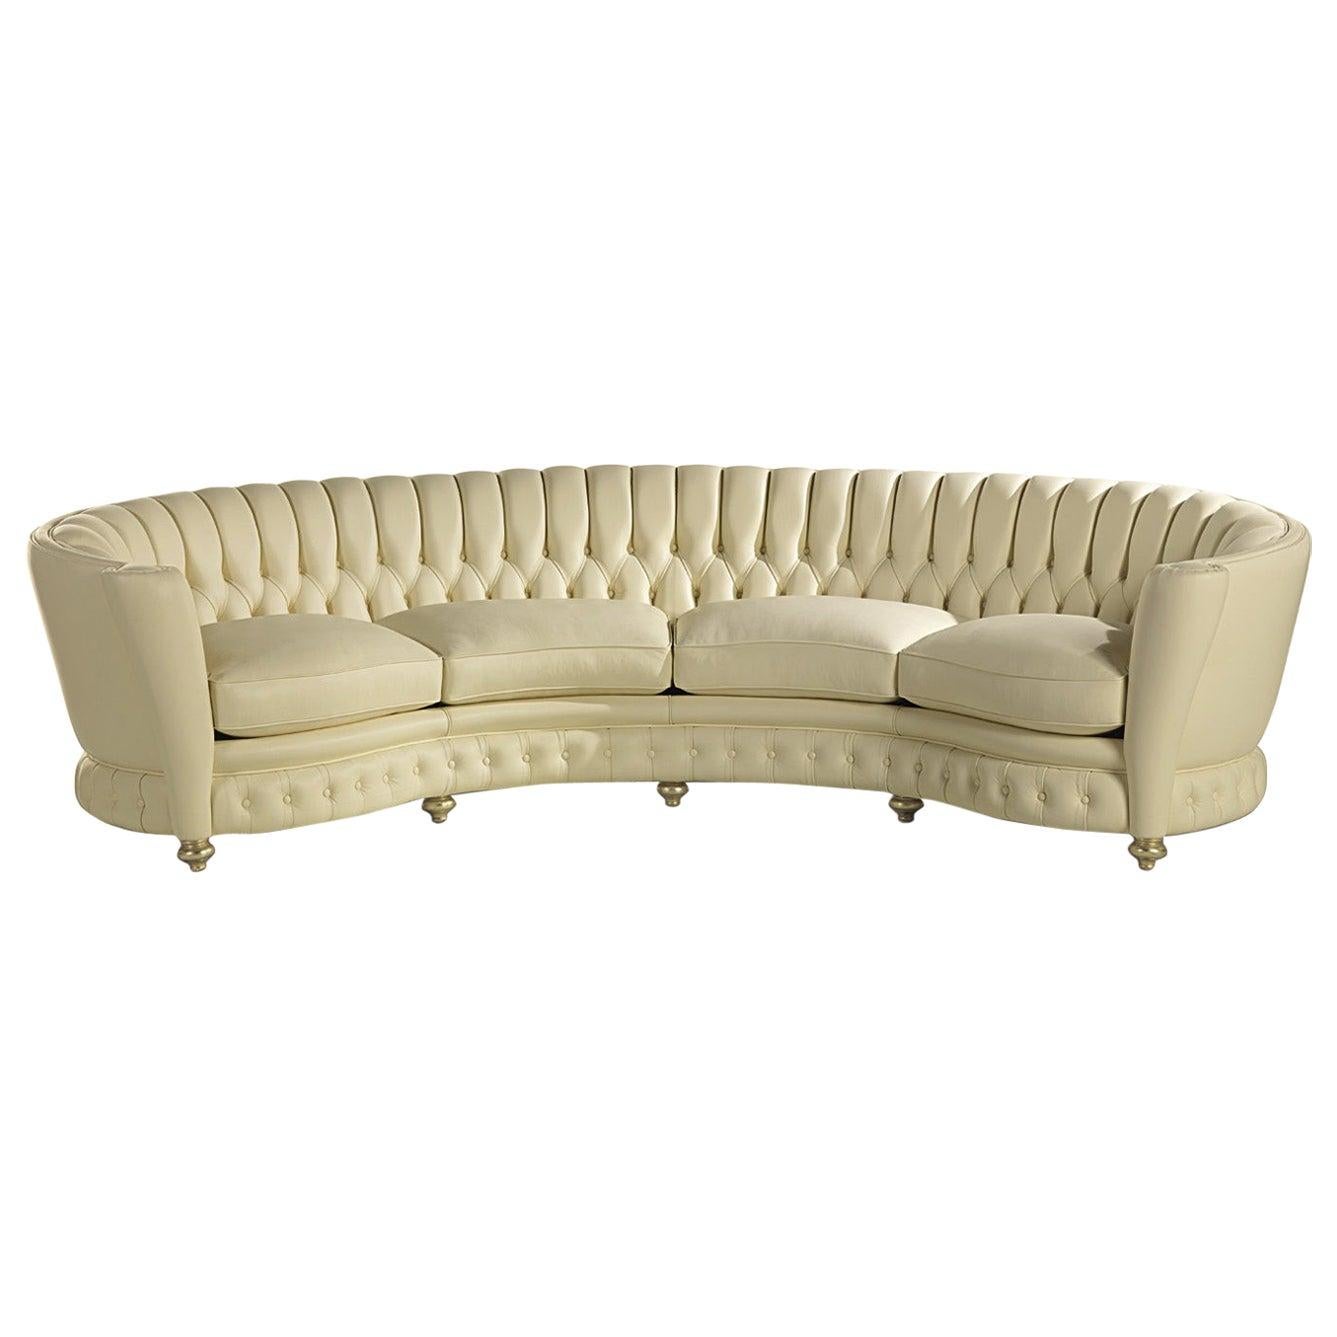 The millennium special shape sofa upholstered in leather 2261 with its curved line will beautifully fit exclusive living rooms, bringing elegance to the interior without giving up to an extremely comfortable seat. Fully upholstered in leather, it